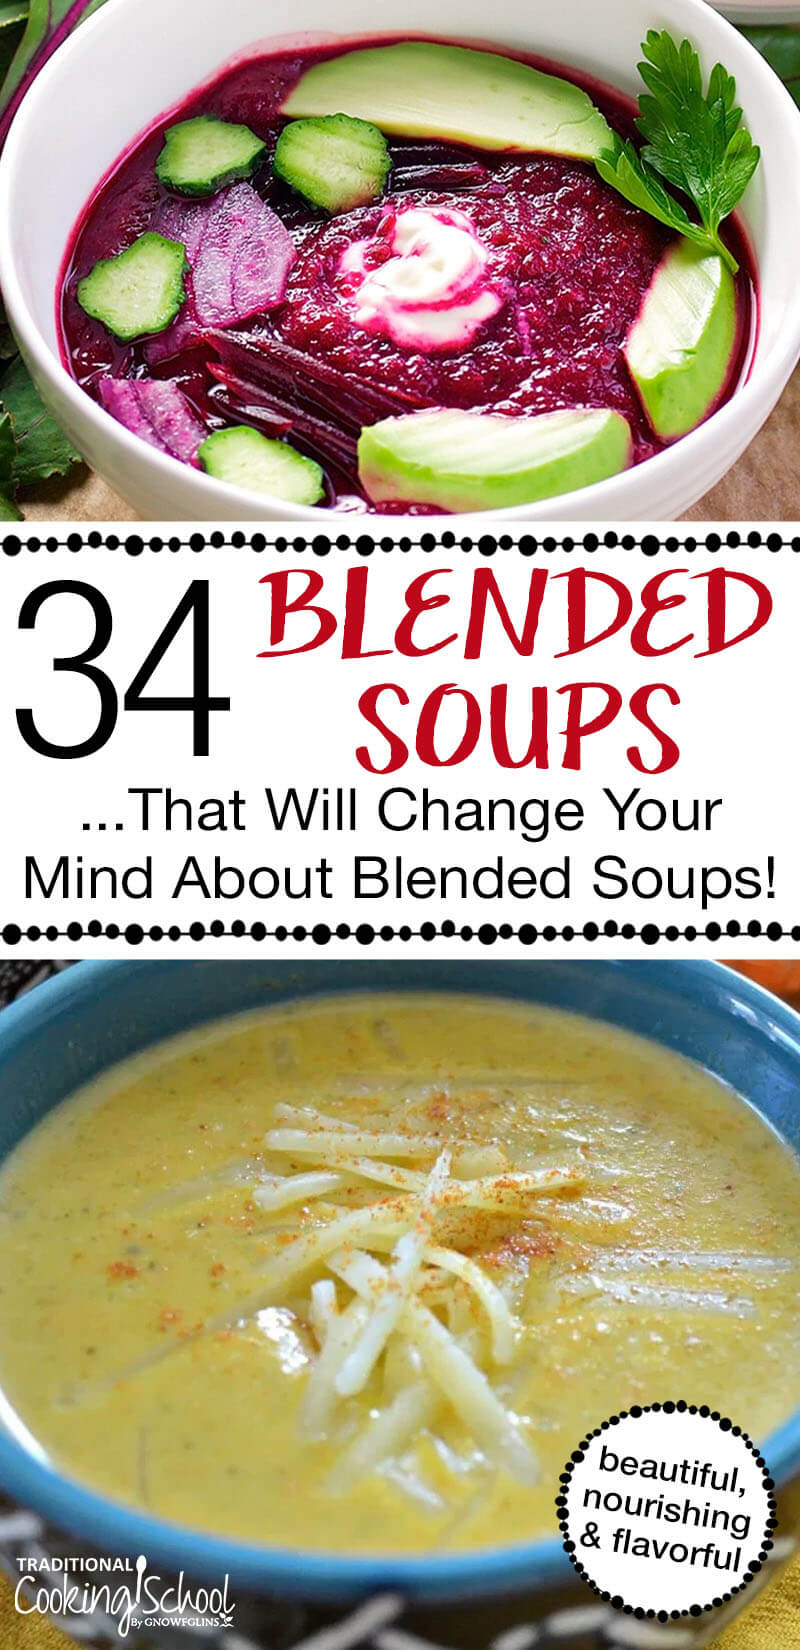 Pinterest pin with two images. The top image is of a bowl of blended beet soup topped with avocado and cucumbers. The bottom image is of a bowl of blended broccoli cheddar soup topped with grated cheese. Text overlay says, "34 Blended Soups ...That Will Change Your Mind About Blended Soups!"